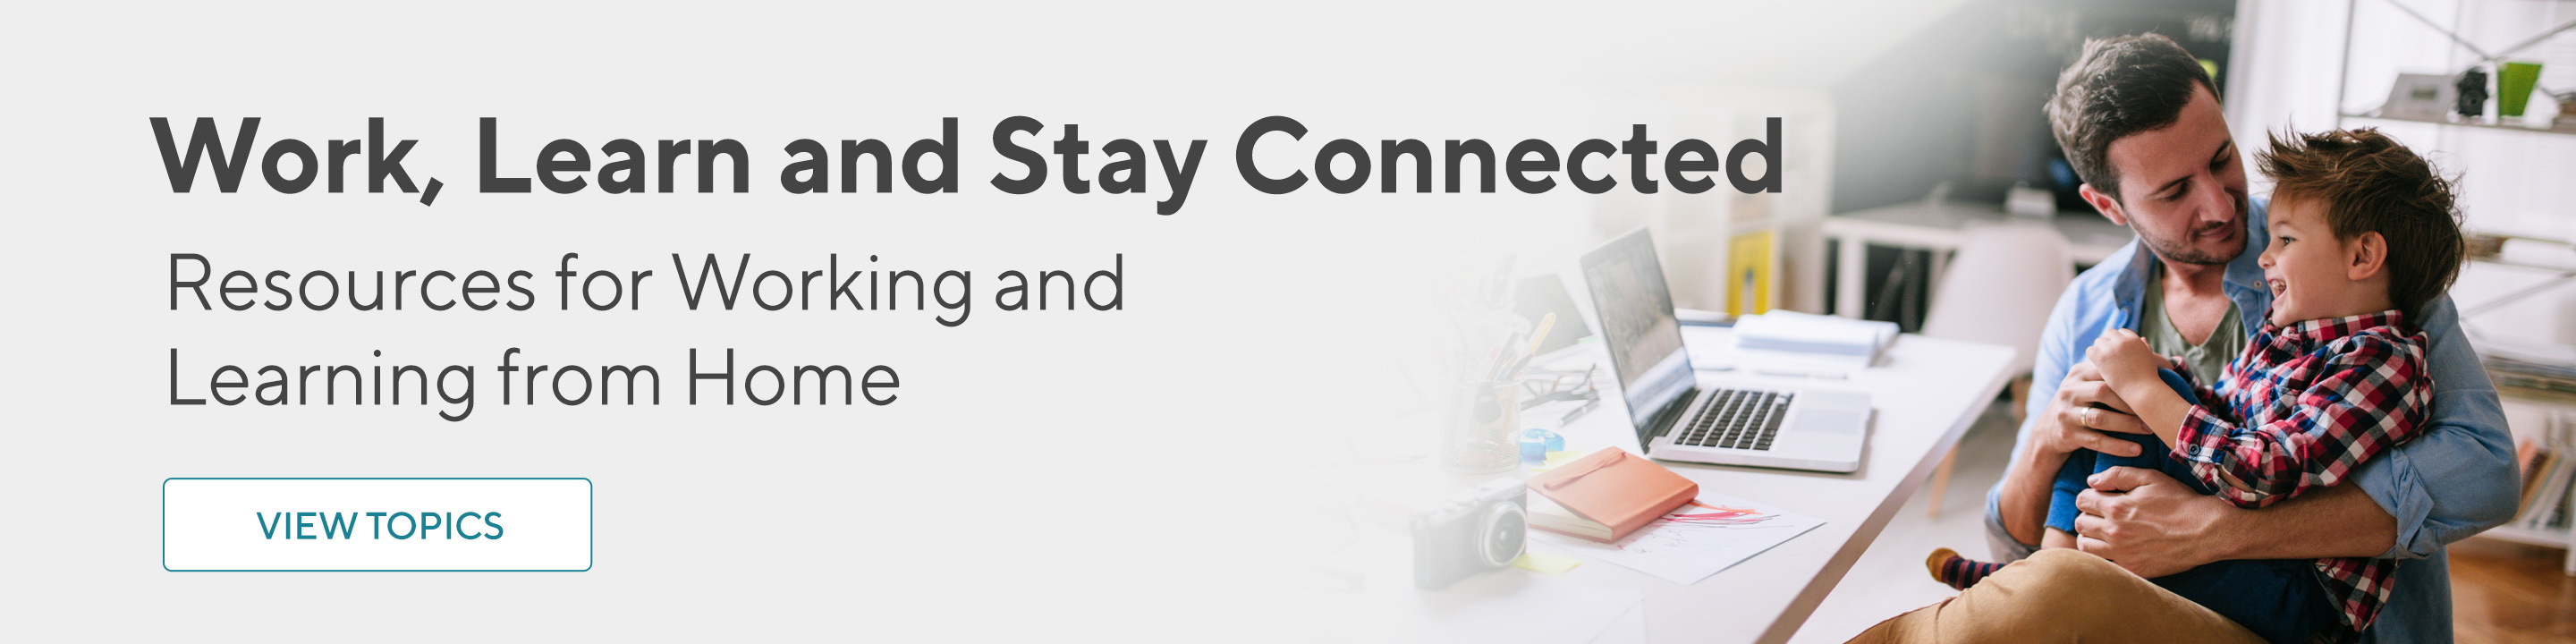 Work, Learn, and Stay Connected banner